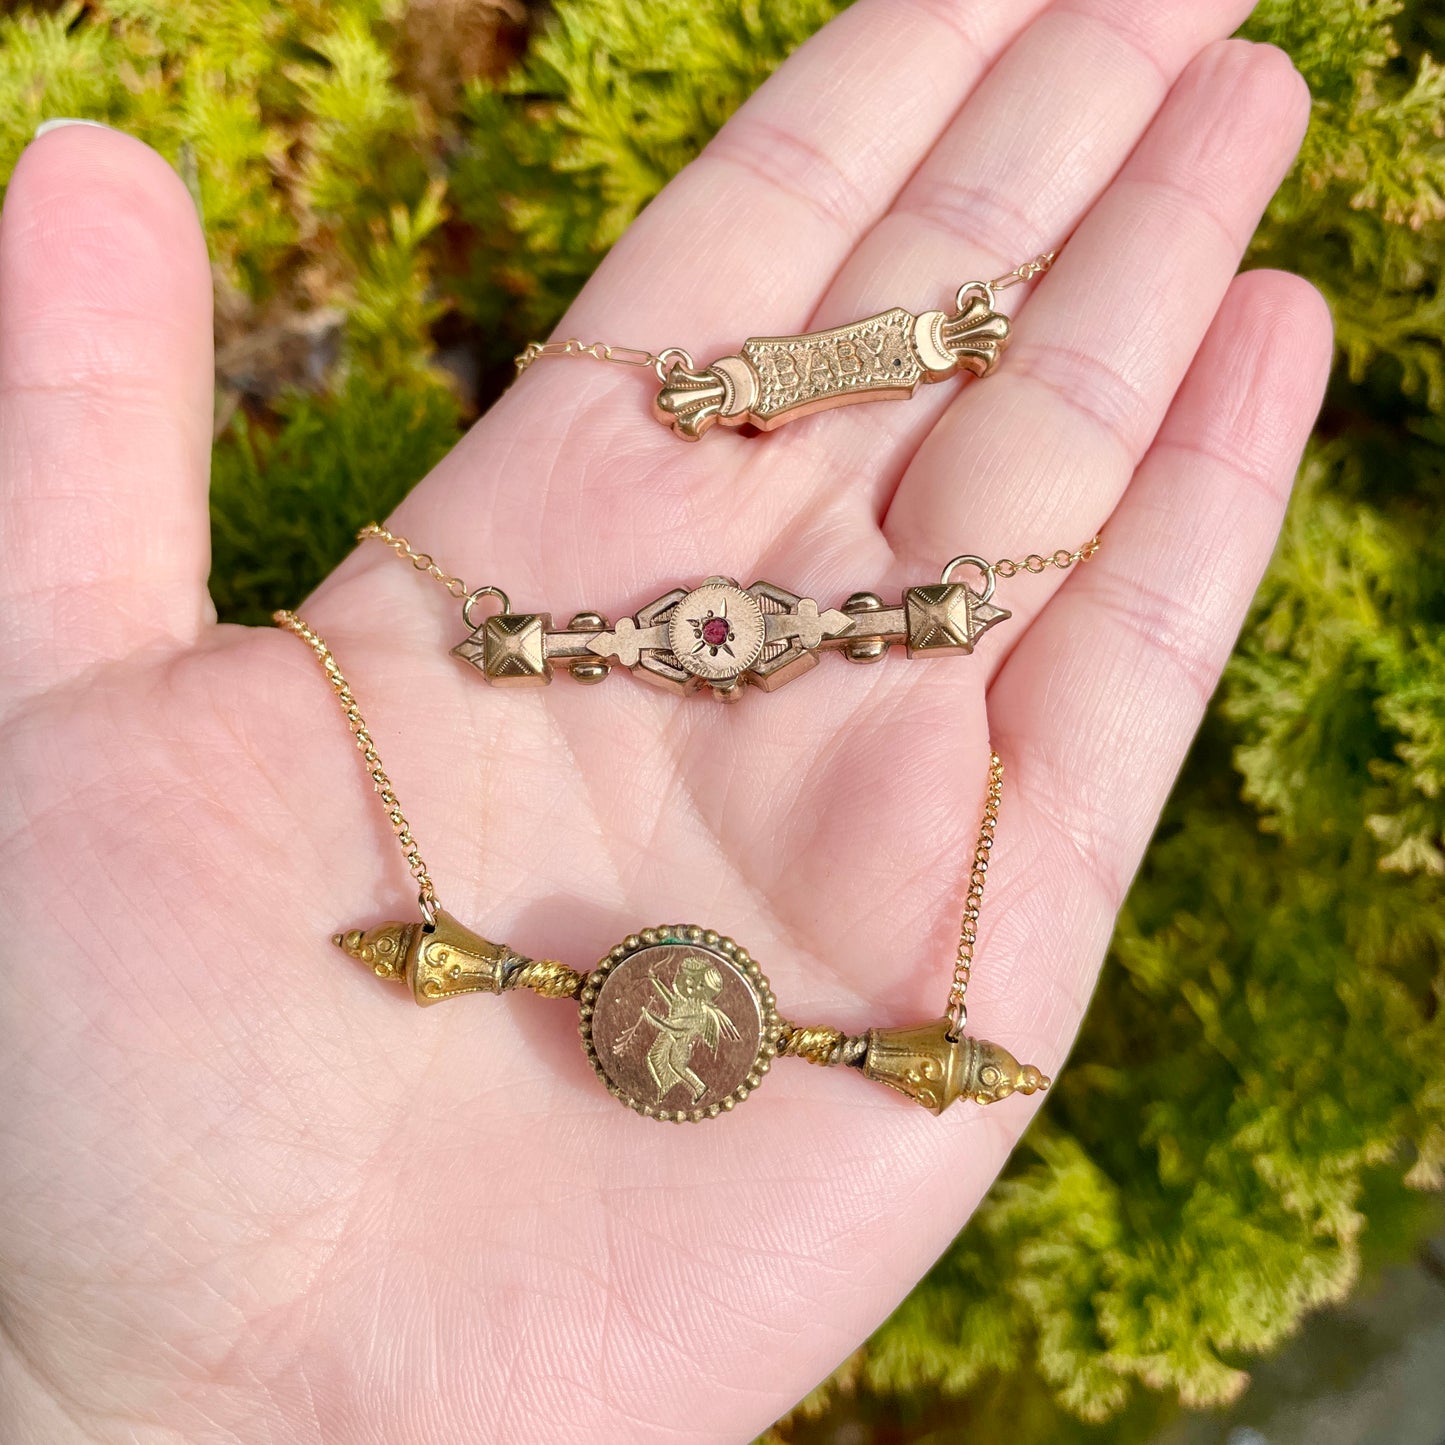 3 bar pin necklaces in palm of hand on background of evergreen foliage: Baby bar pin necklace, red paste edwardian bar pin necklace, cupid with his bow and arrow bar pin necklace